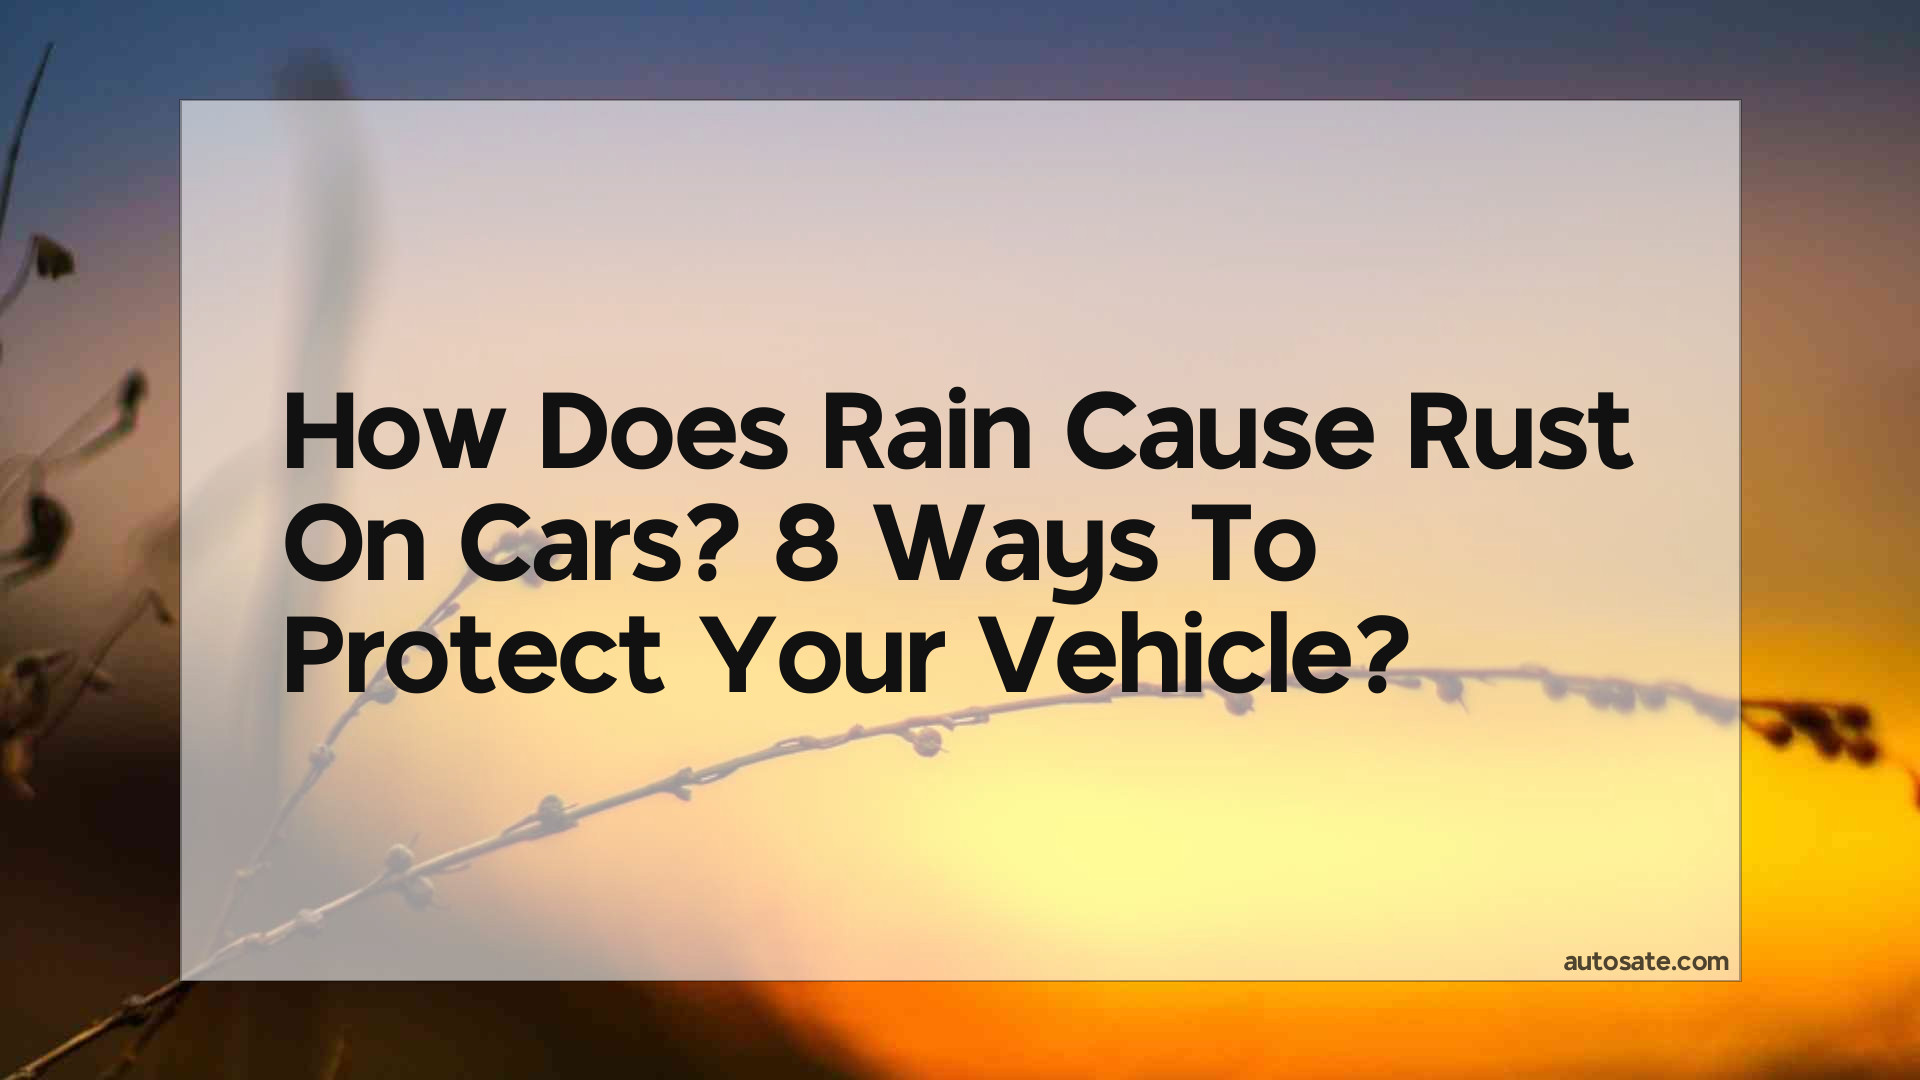 Does Rain Cause Rust On Cars? 8 Ways To Protect Your Vehicle